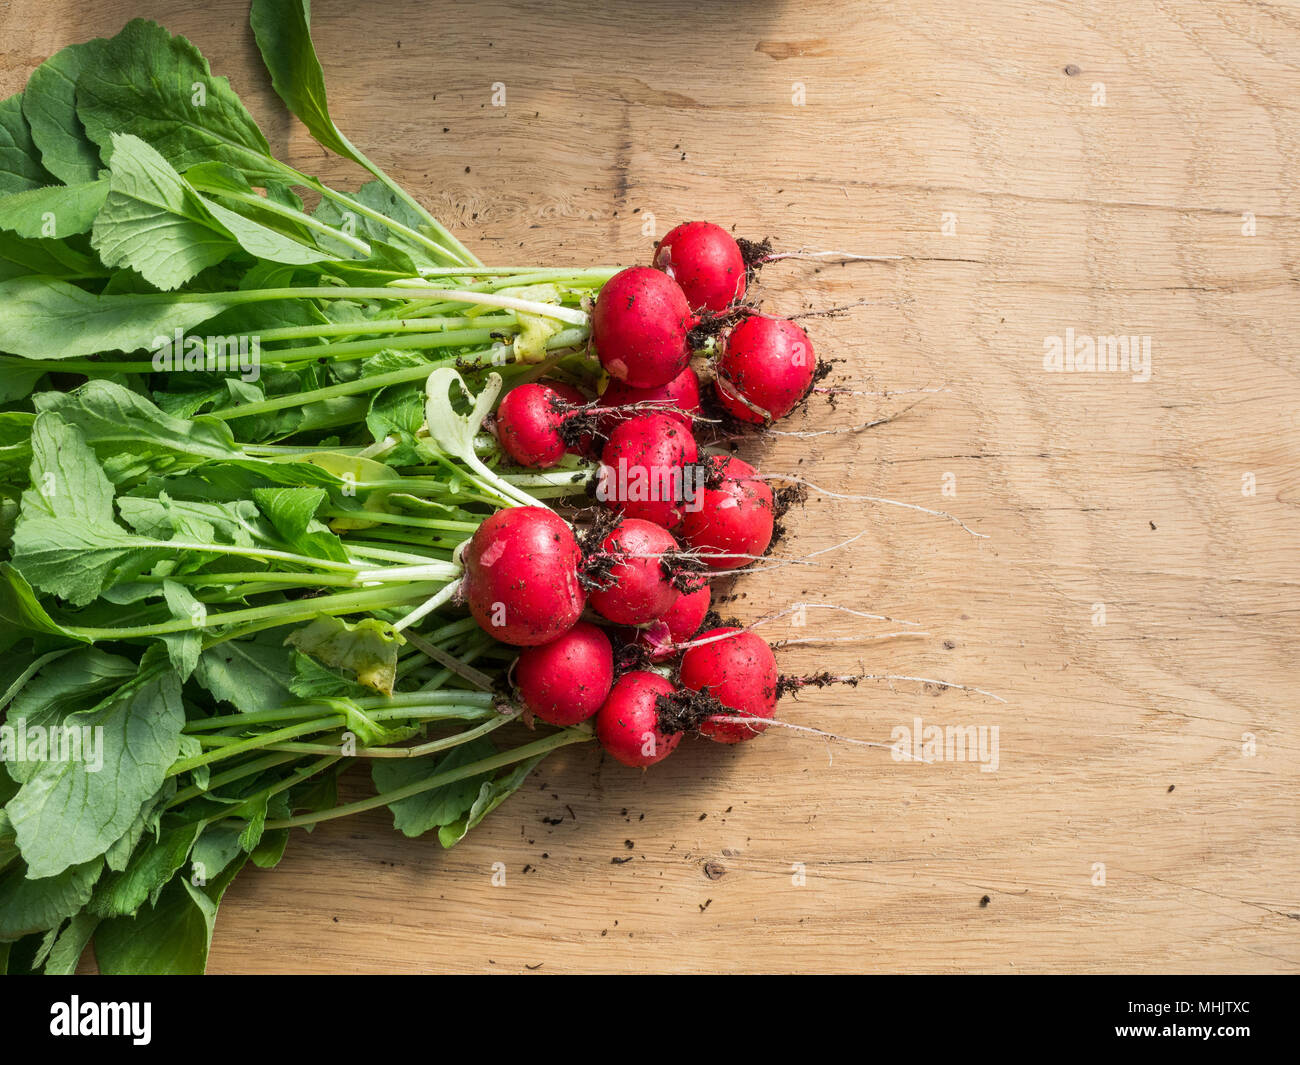 A bunch of bright red radish Scarlet Globe on a wooden surface Stock Photo